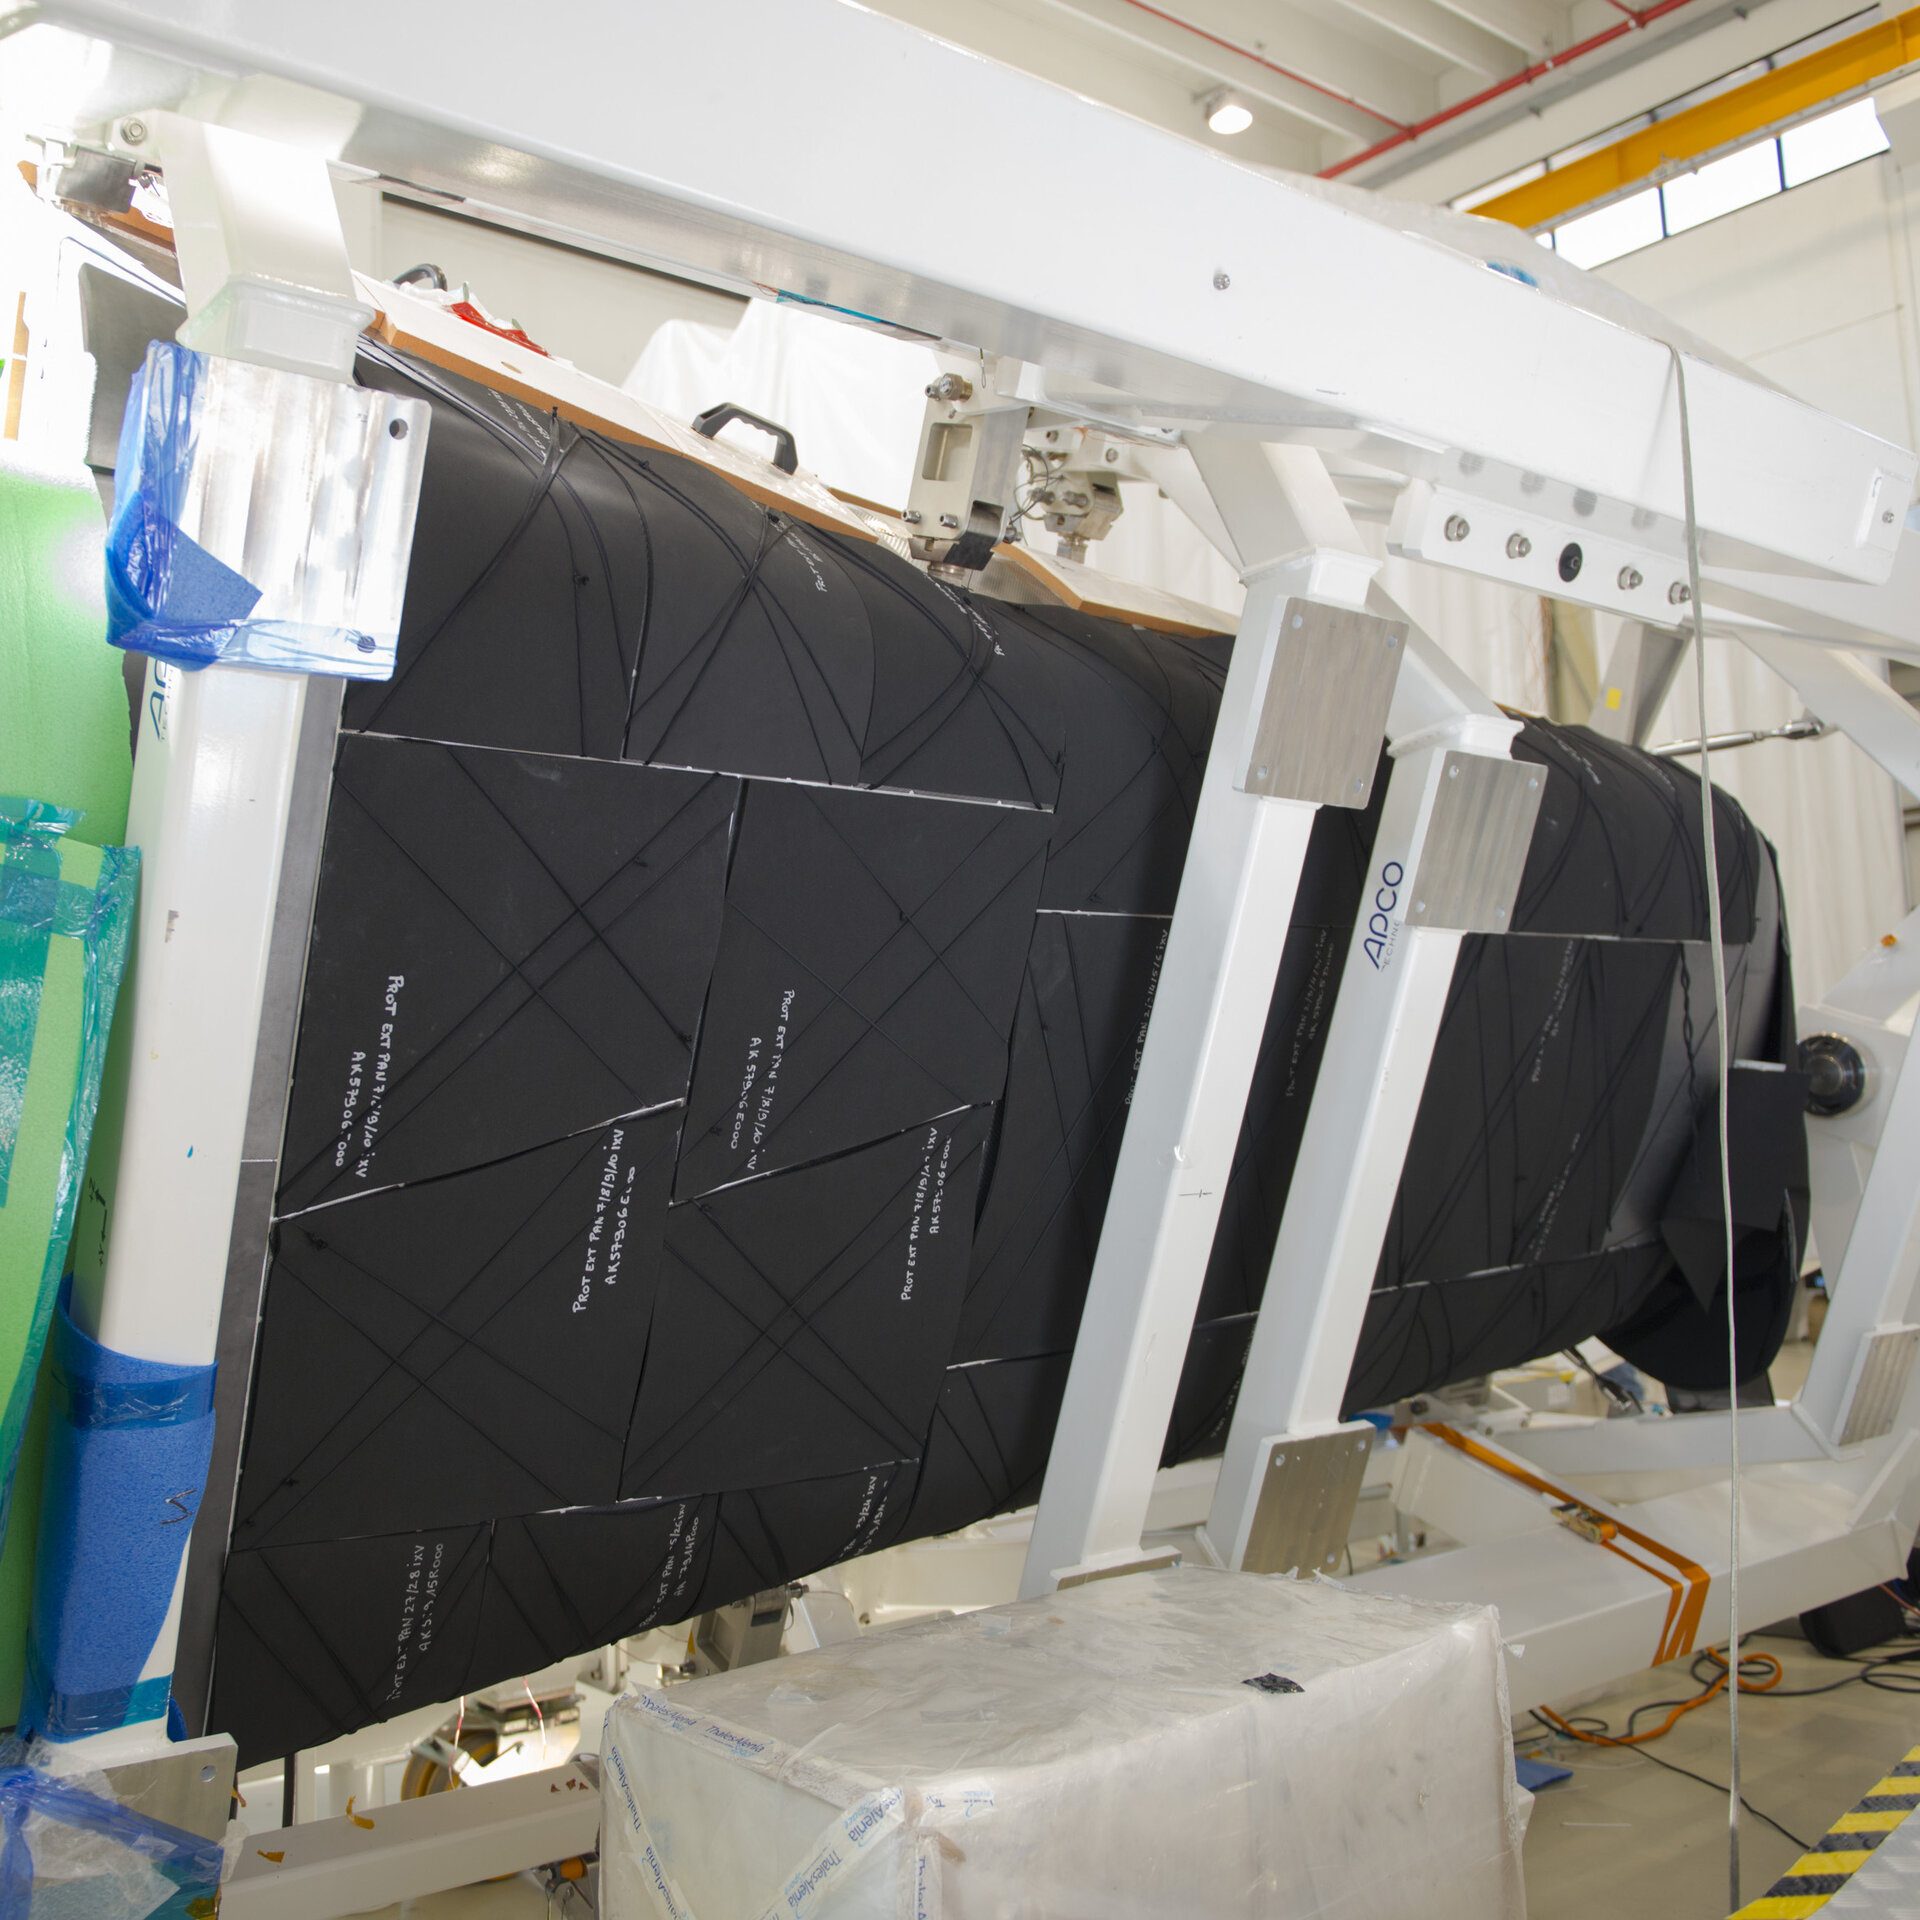 IXV during the last preparations at Thales Alenia Space 